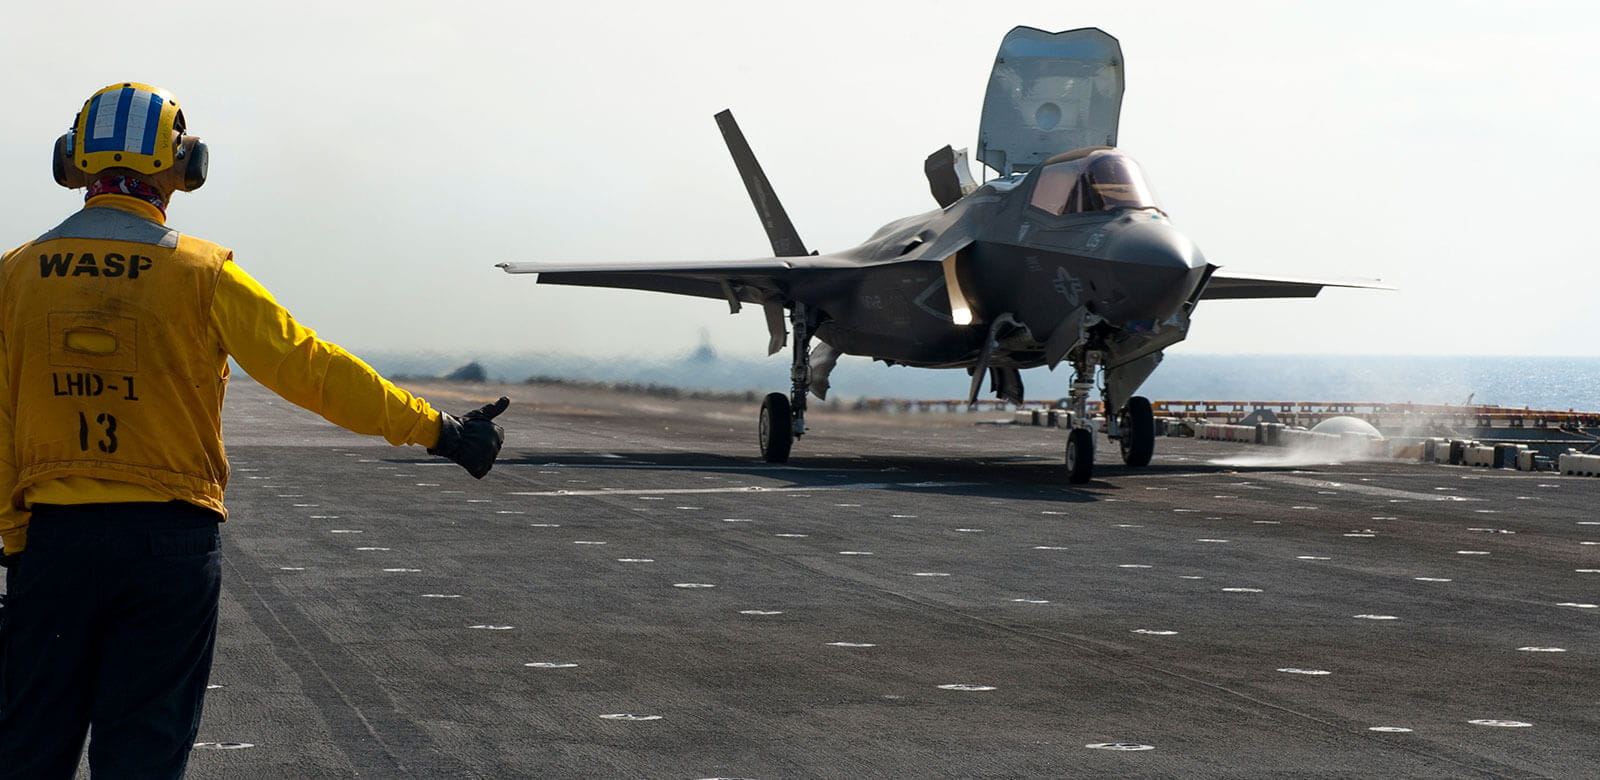 Jet landing on the deck of a ship with a crewman giving the thumbs up.